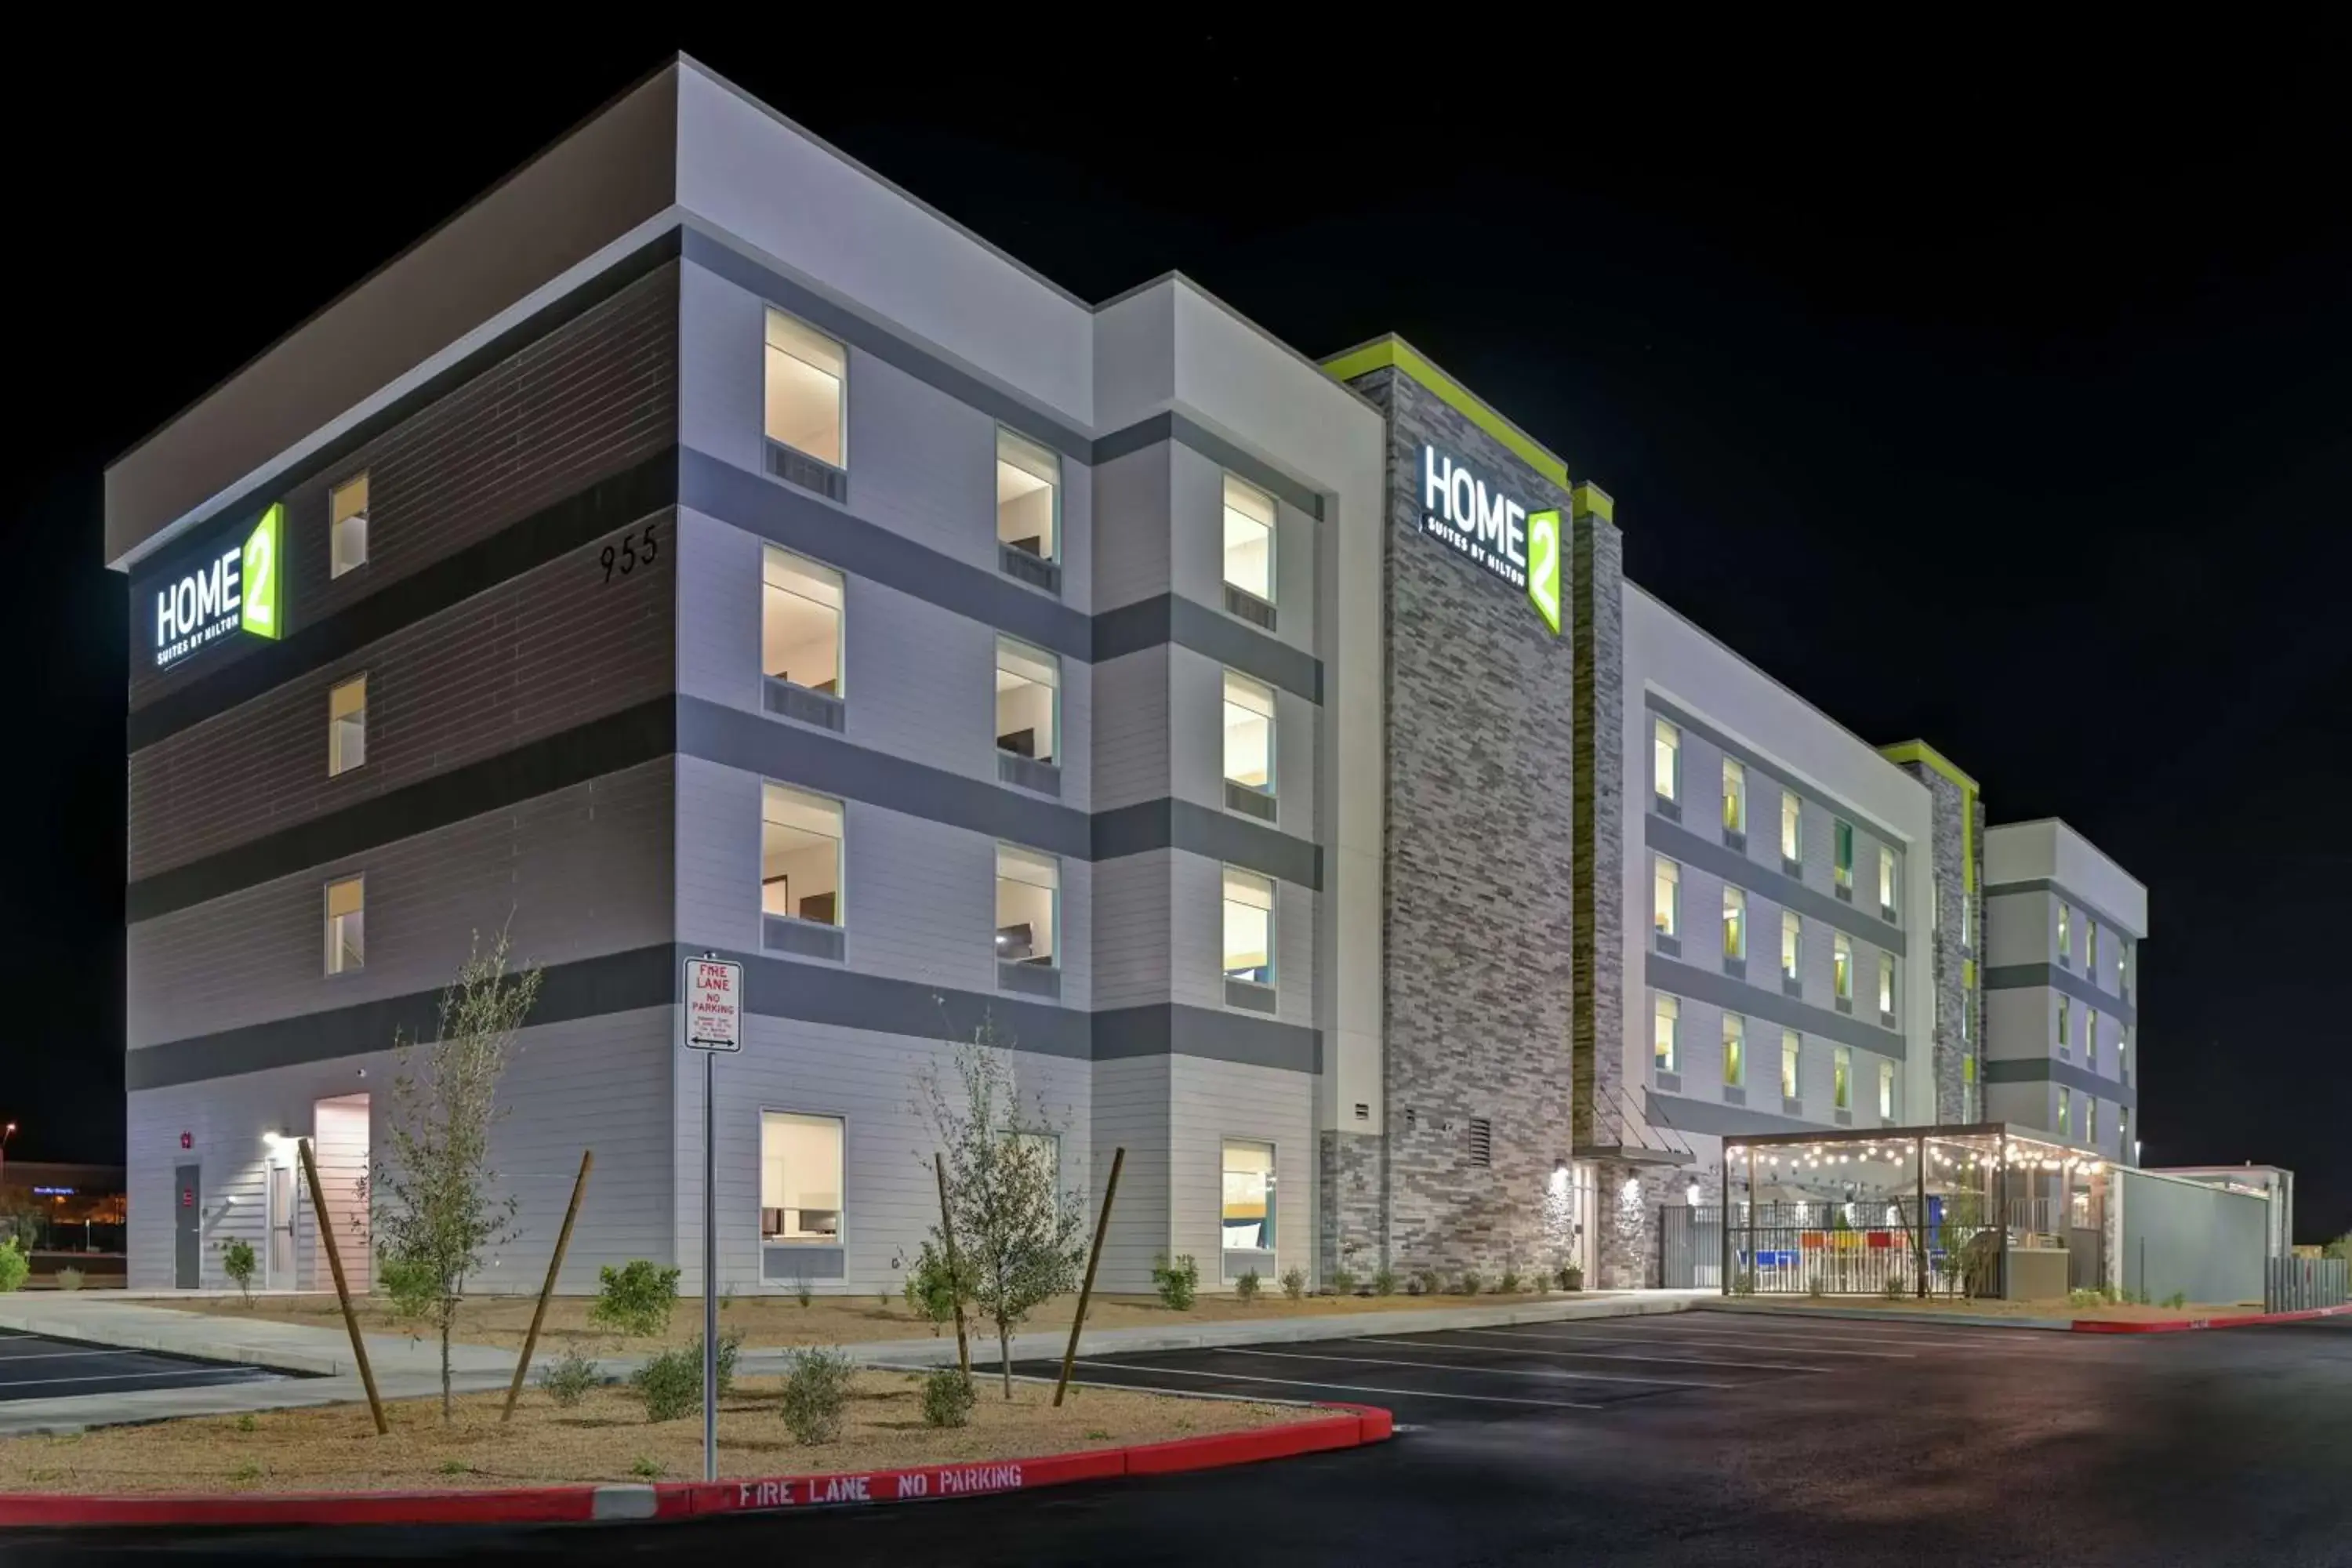 Property Building in Home2 Suites By Hilton Buckeye Phoenix